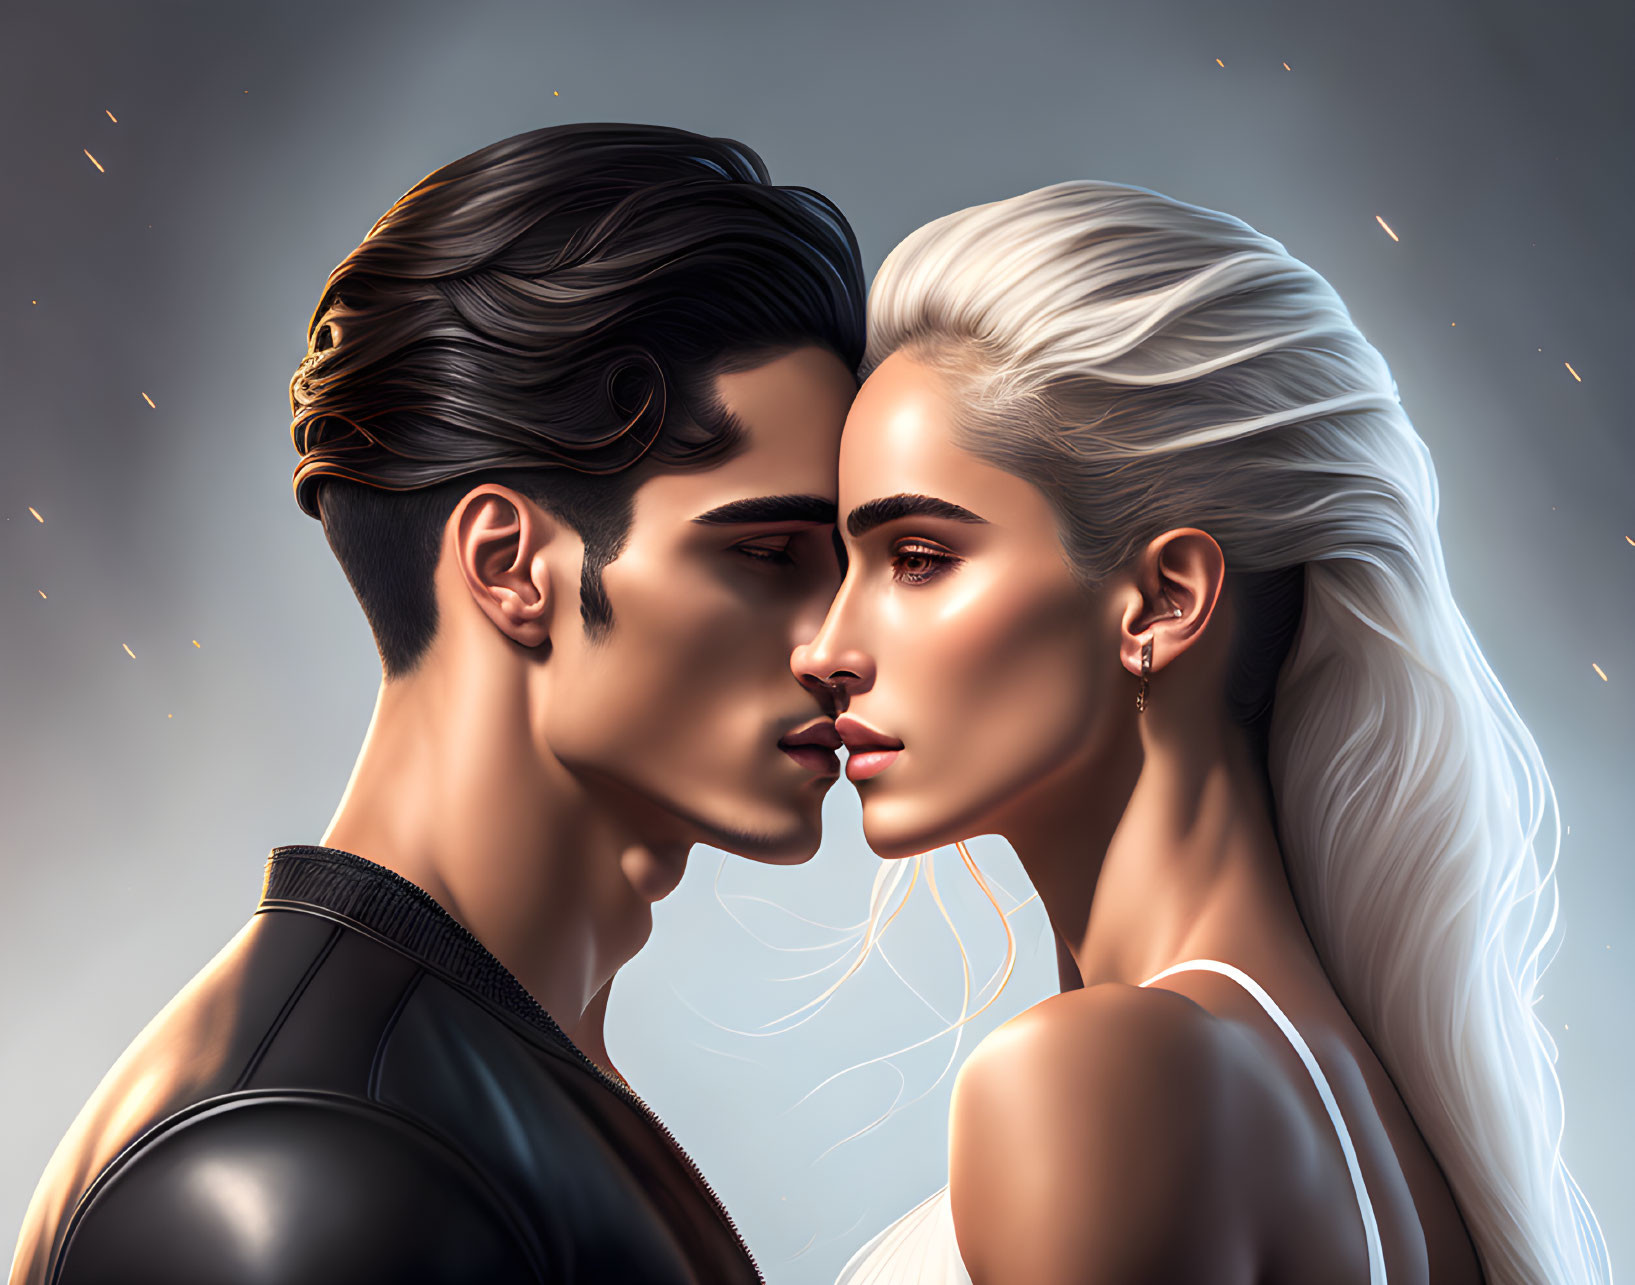 Romantic digital illustration of man and woman in close pose